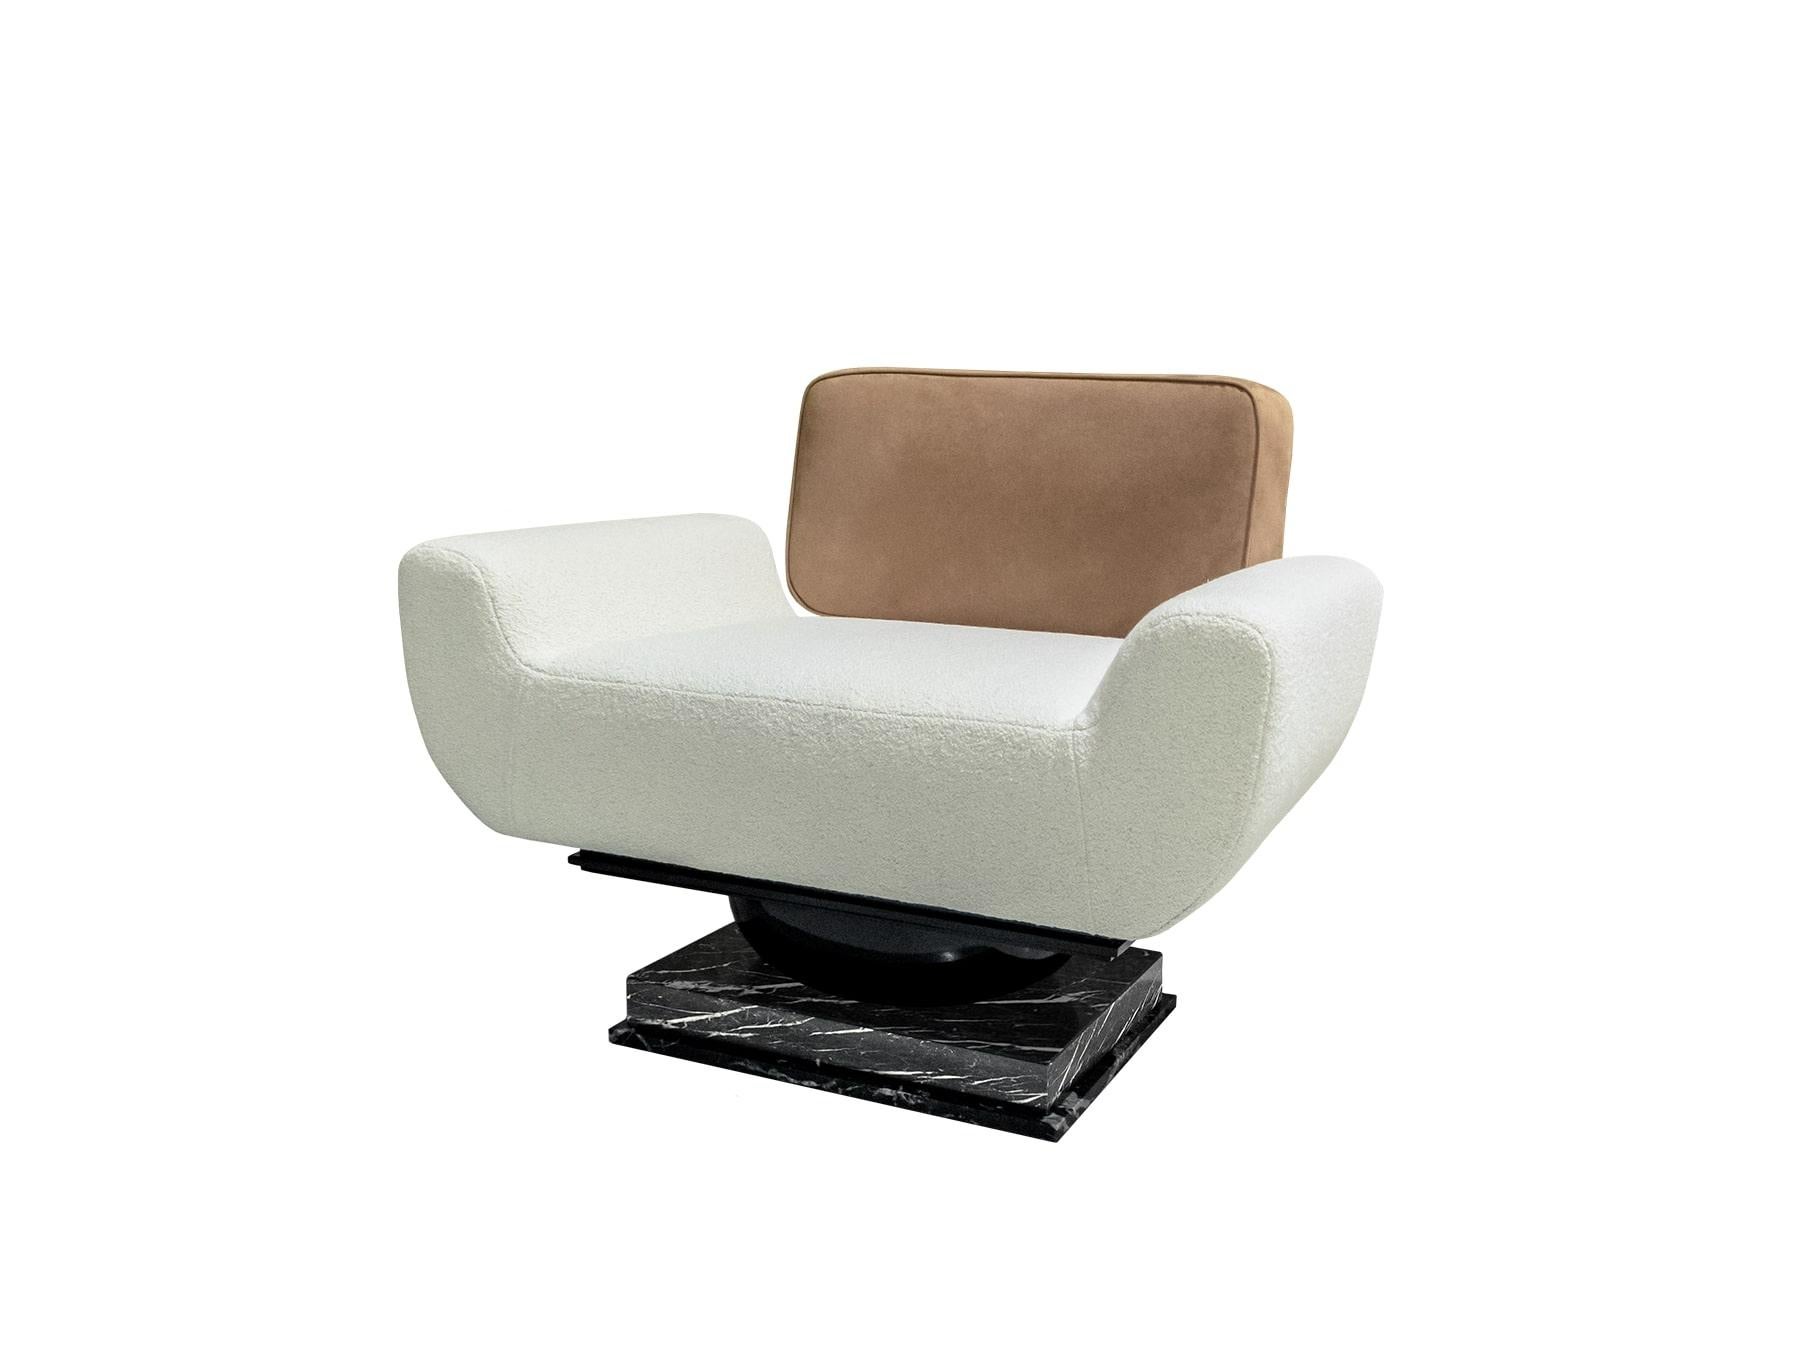 Modern armchair bouclé, leather upholstered & Nero Marquina marble Alice armchair
Alice armchair is a luxury armchair composed by exquisite materials. This eclectic armchair is perfect for a contemporary interior design project. It features the most